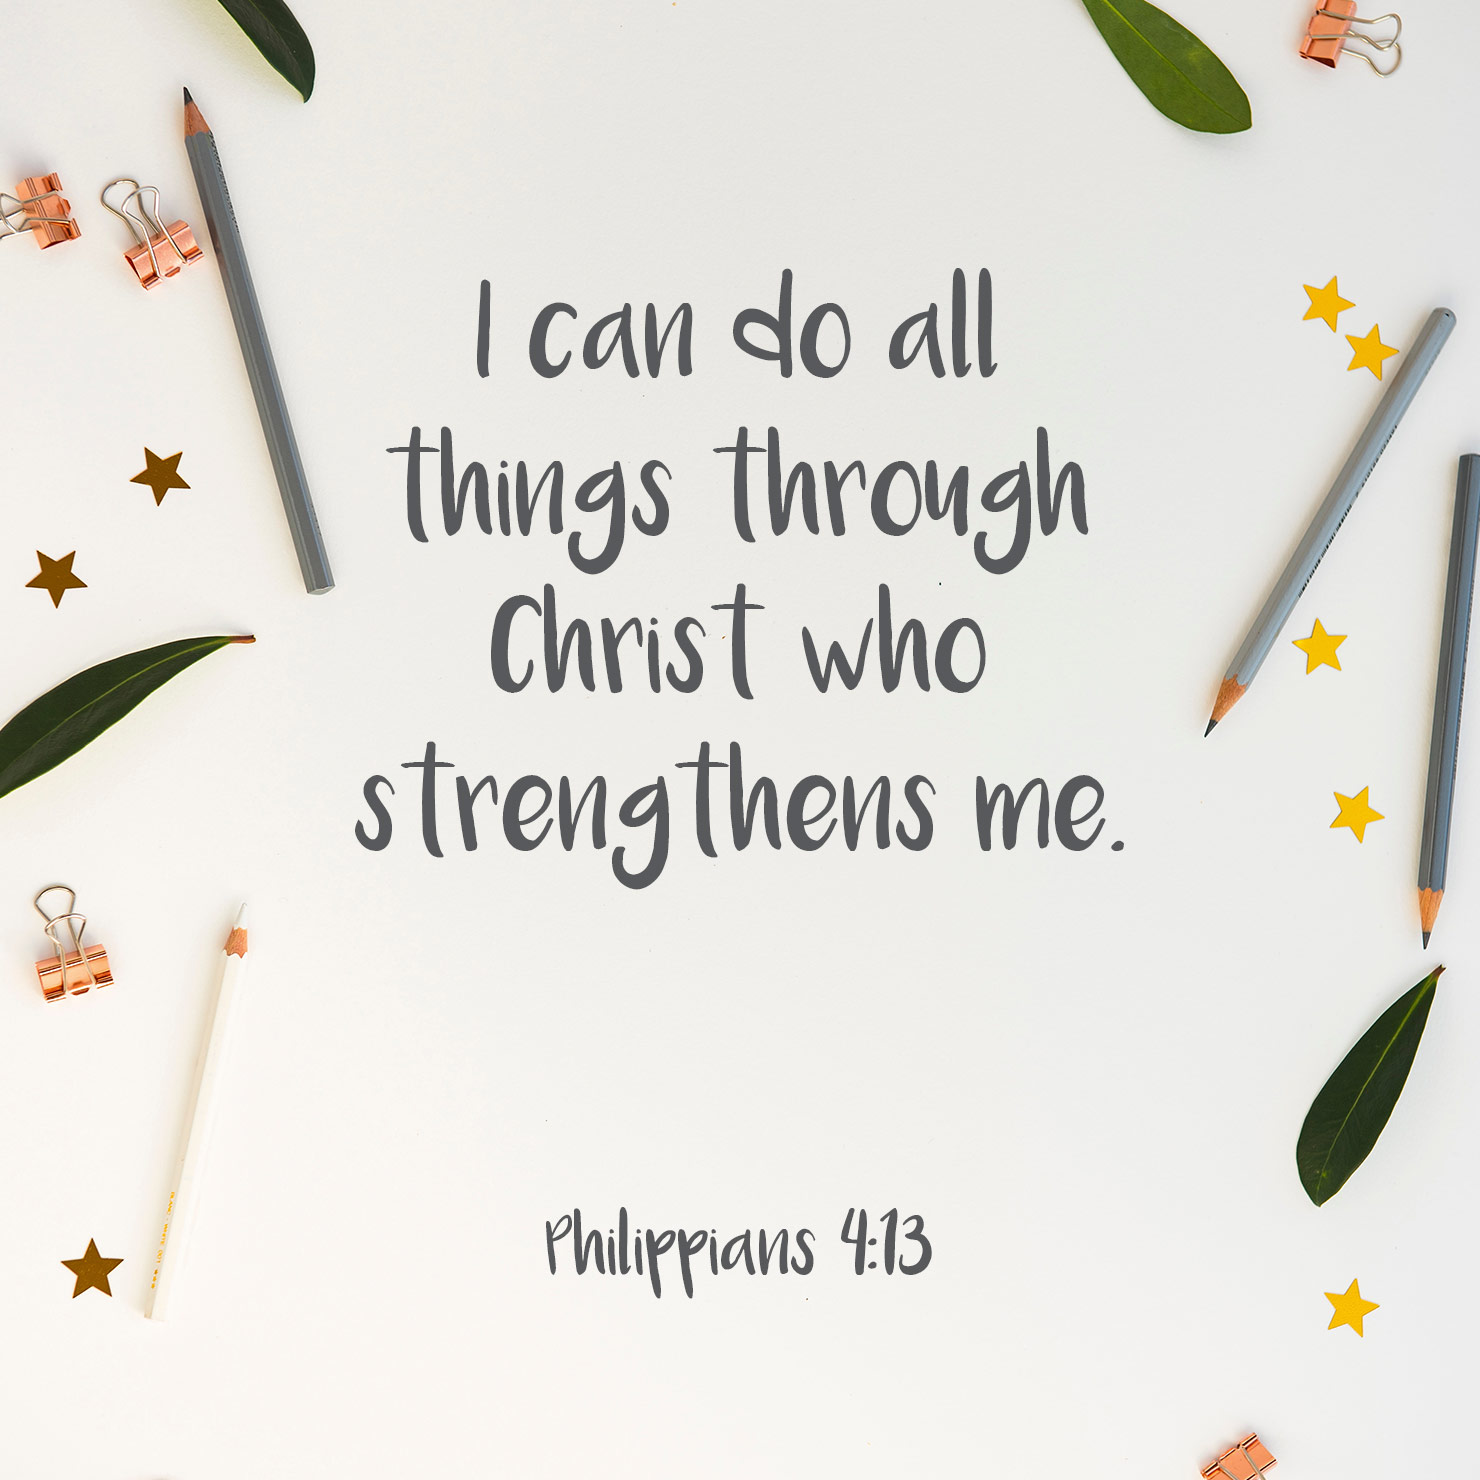 religious graduation quote: i can do things through Christ who strengthens me - philippians 413